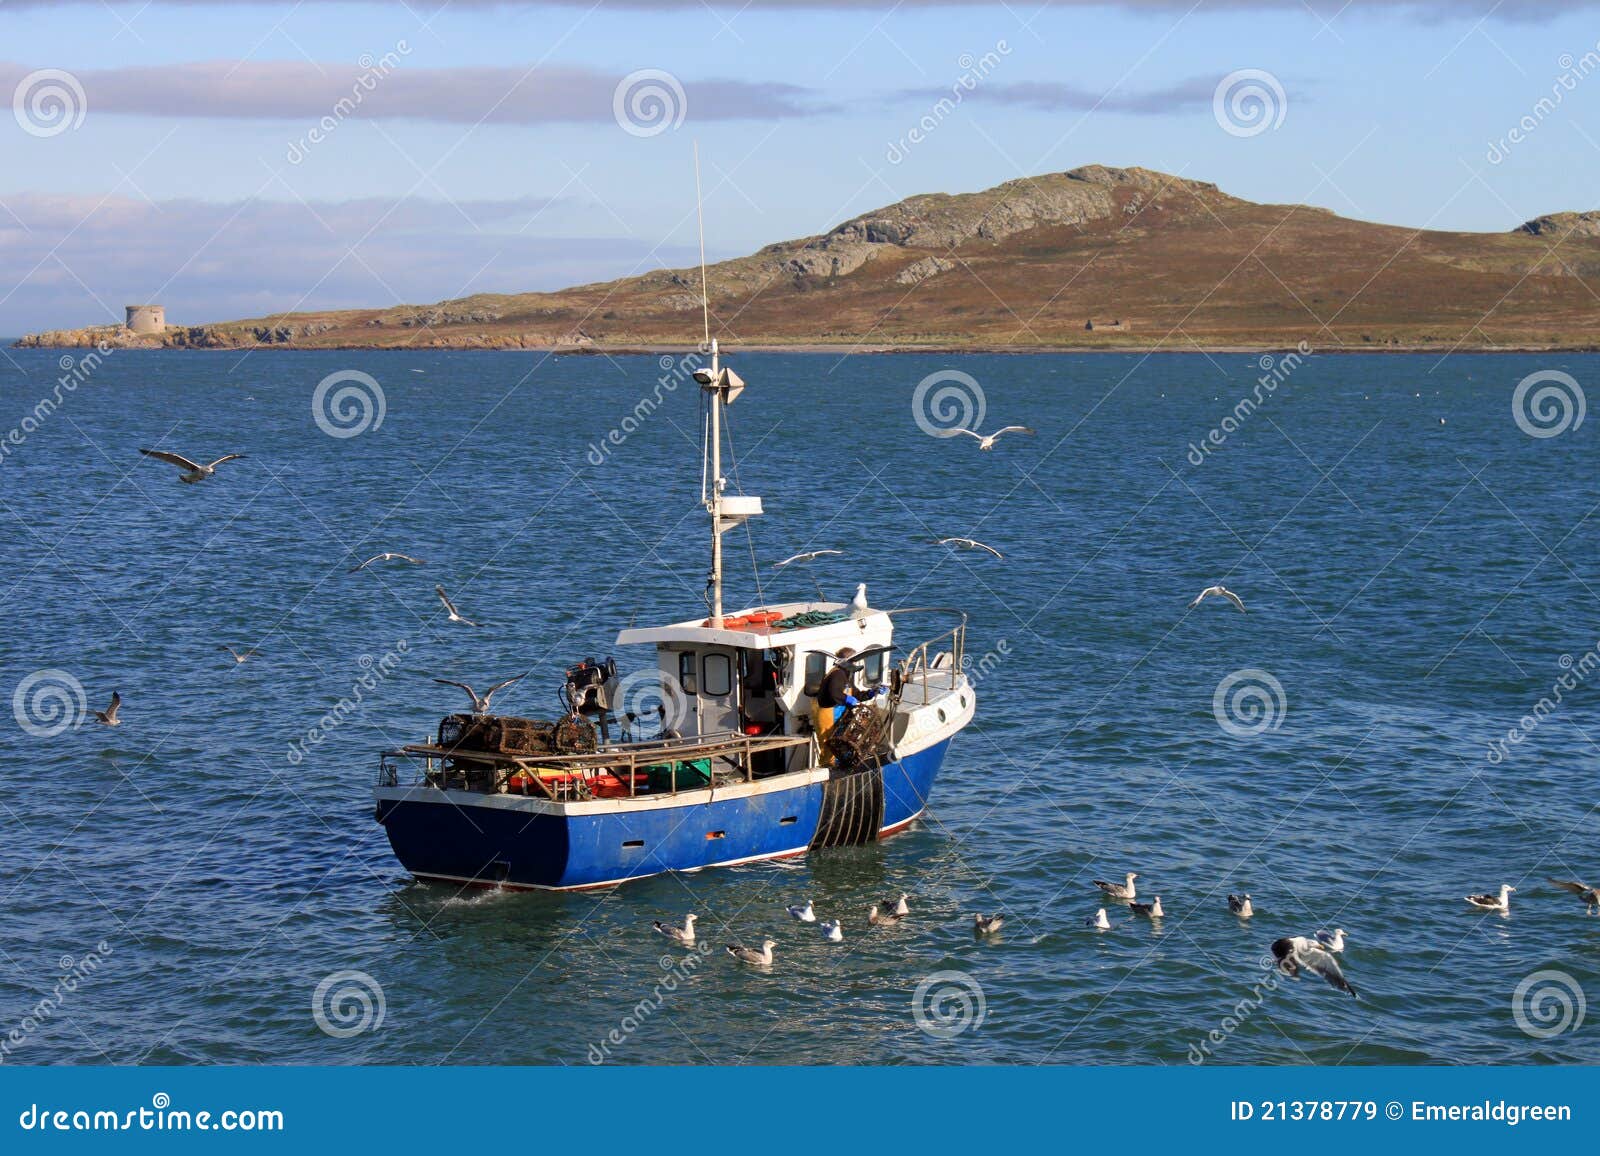 Small Fishing Boat Howth Royalty Free Stock Images - Image: 21378779